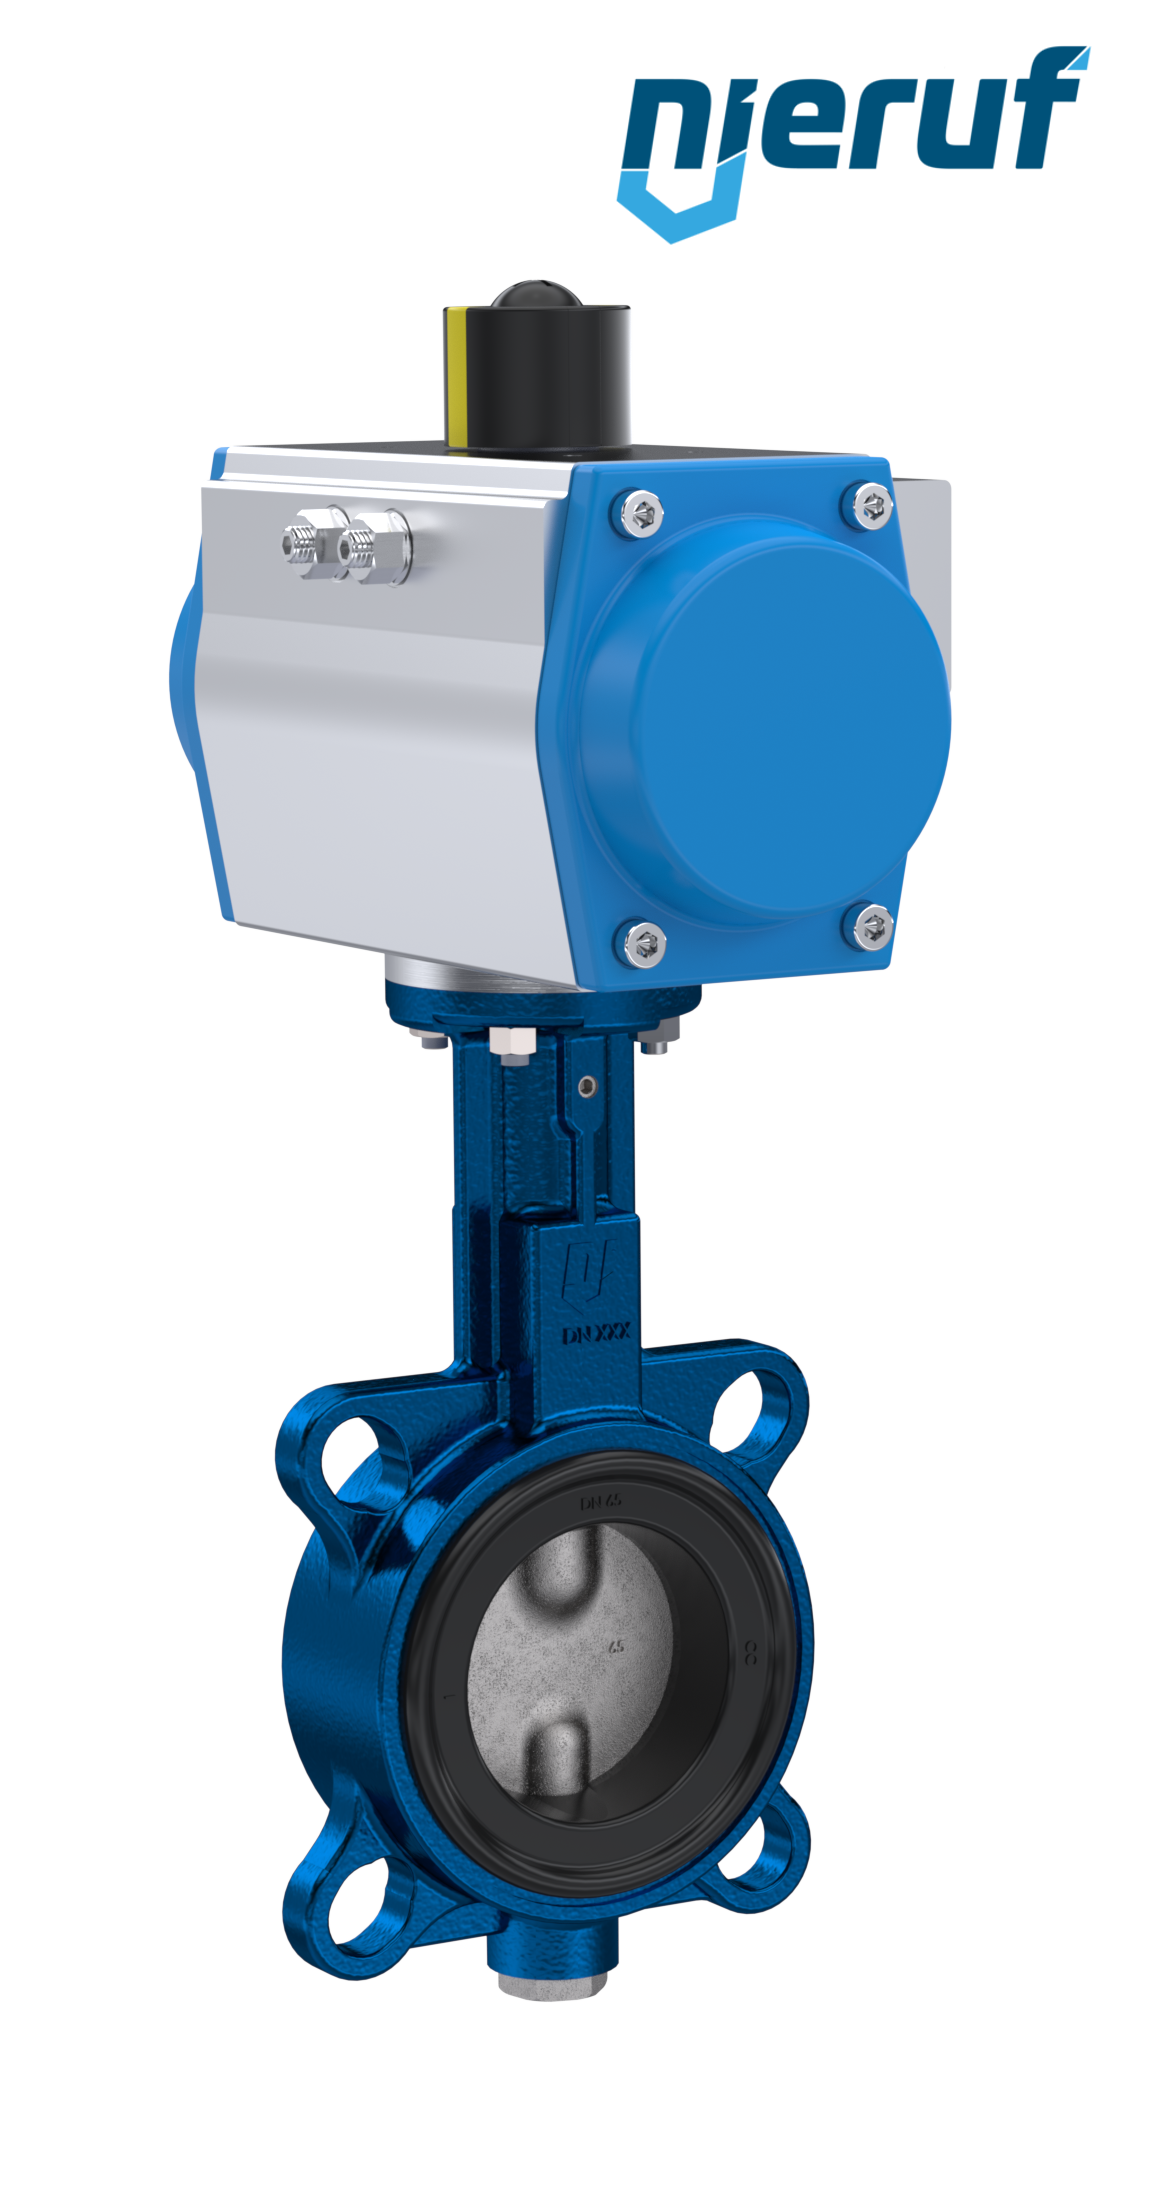 Butterfly valve DN 50 AK01 EPDM DVGW drinking water, WRAS, ACS, W270 pneumatic actuator single acting